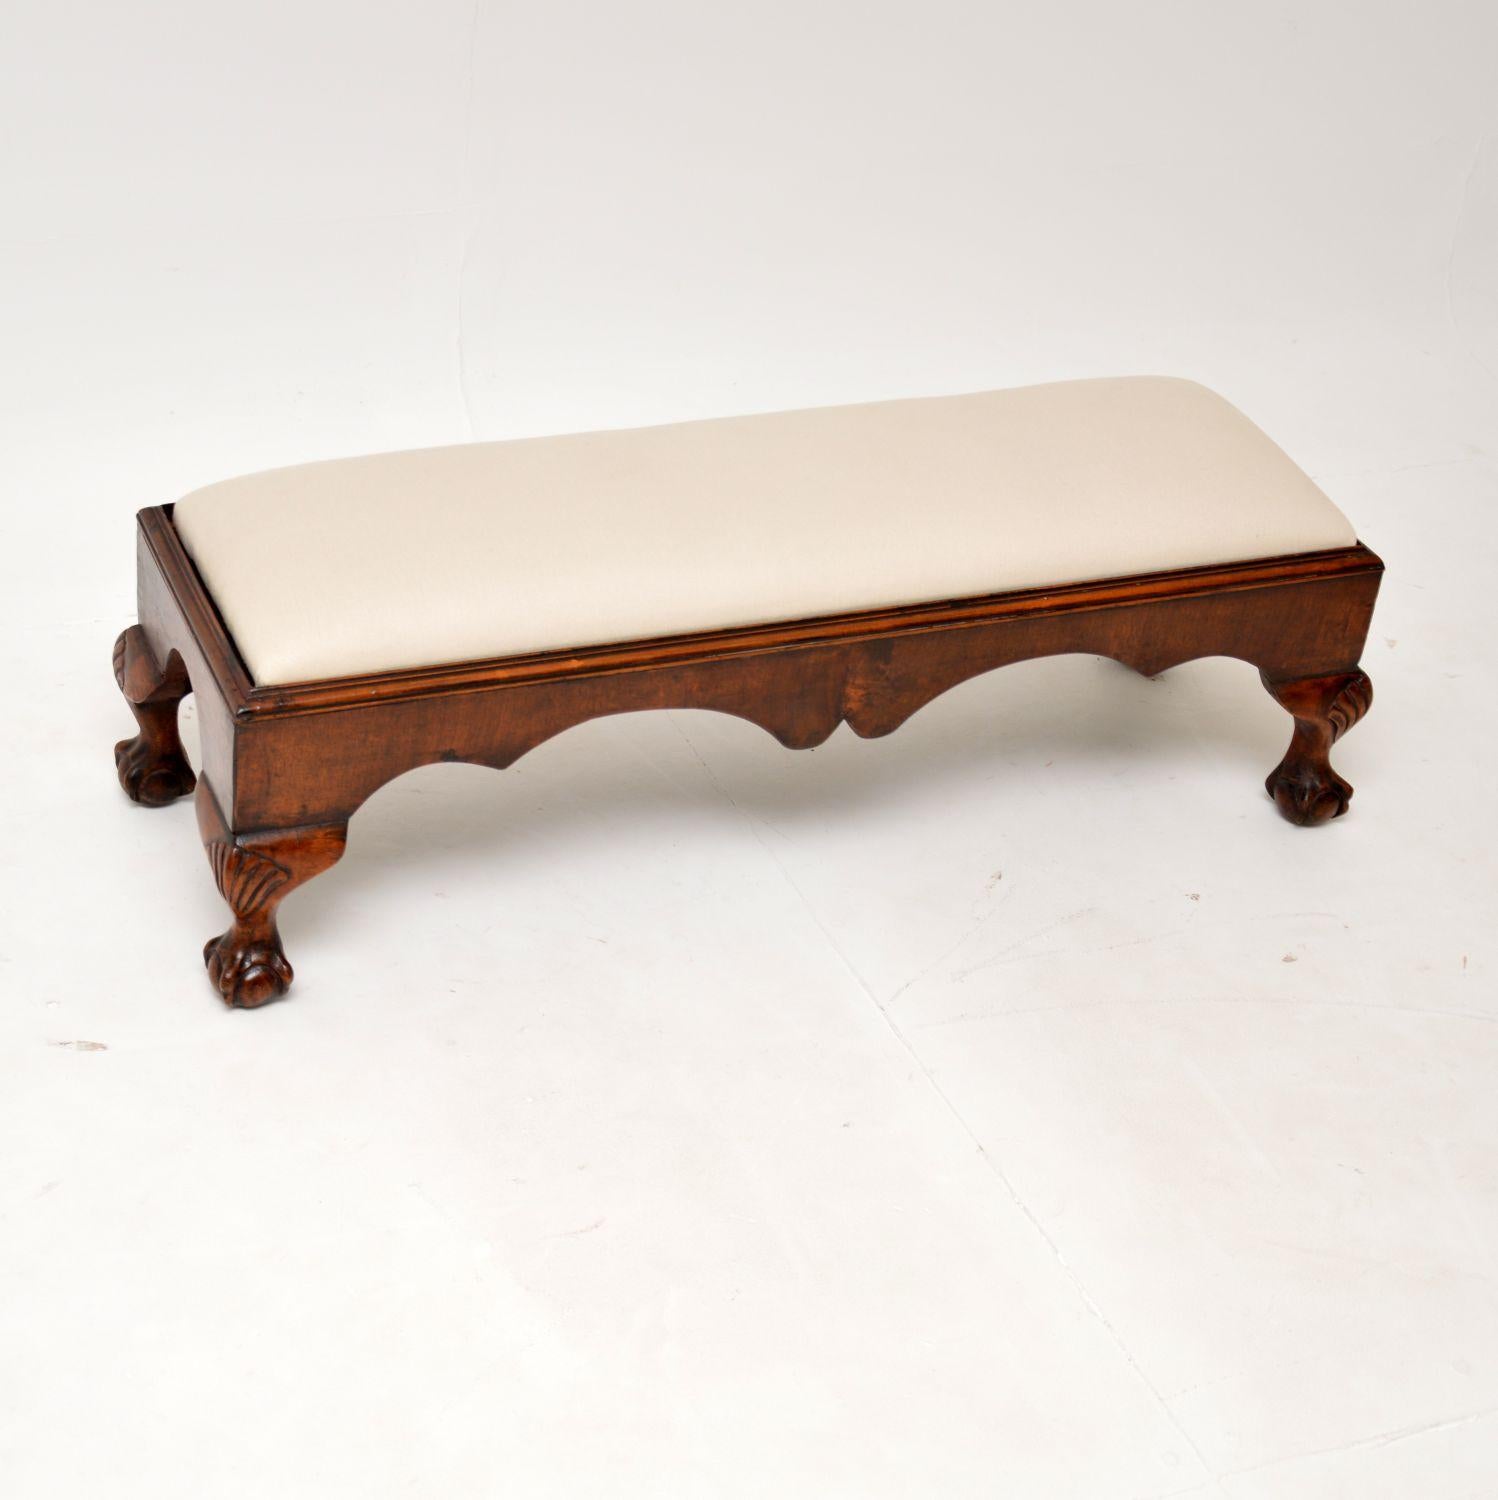 A lovely antique Chippendale Style low foot stool in walnut. This was made in England, it dates from around the 1880-1900 period & is full of character.

It is of excellent quality, with a beautifully shaped edge and a drop in seat that would be